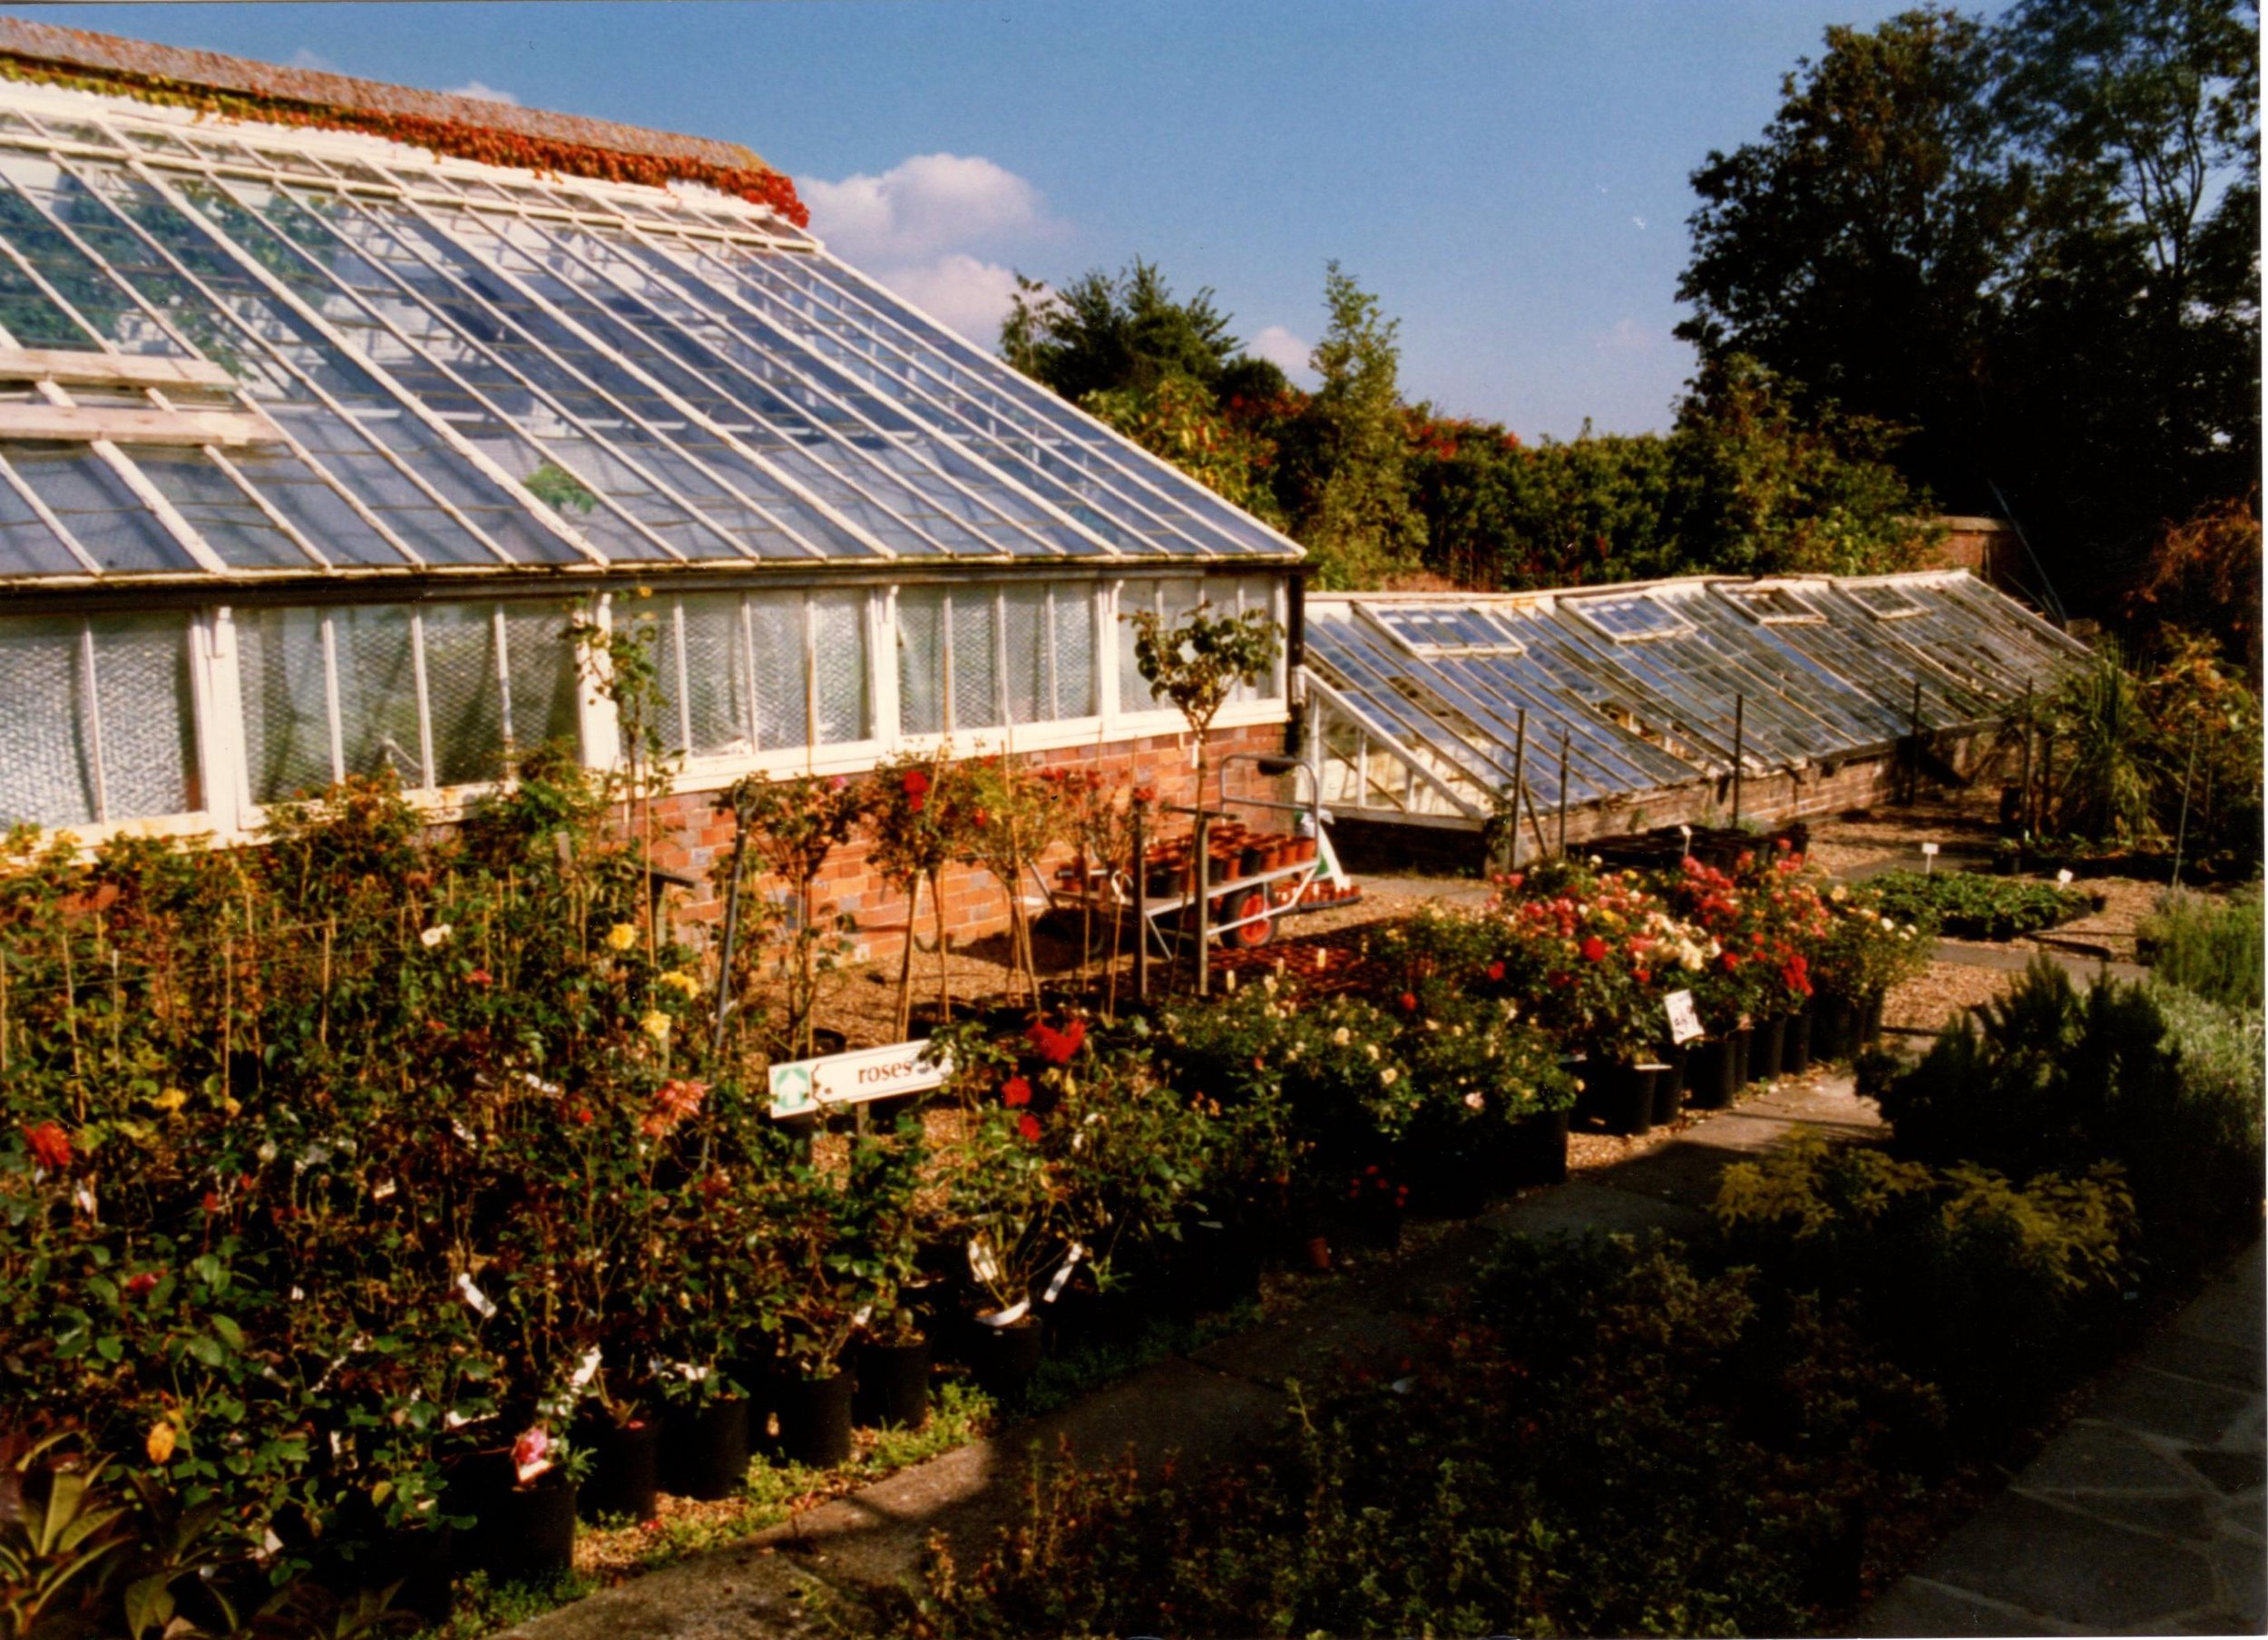 A view of the Victorian glasshouse and Melon house